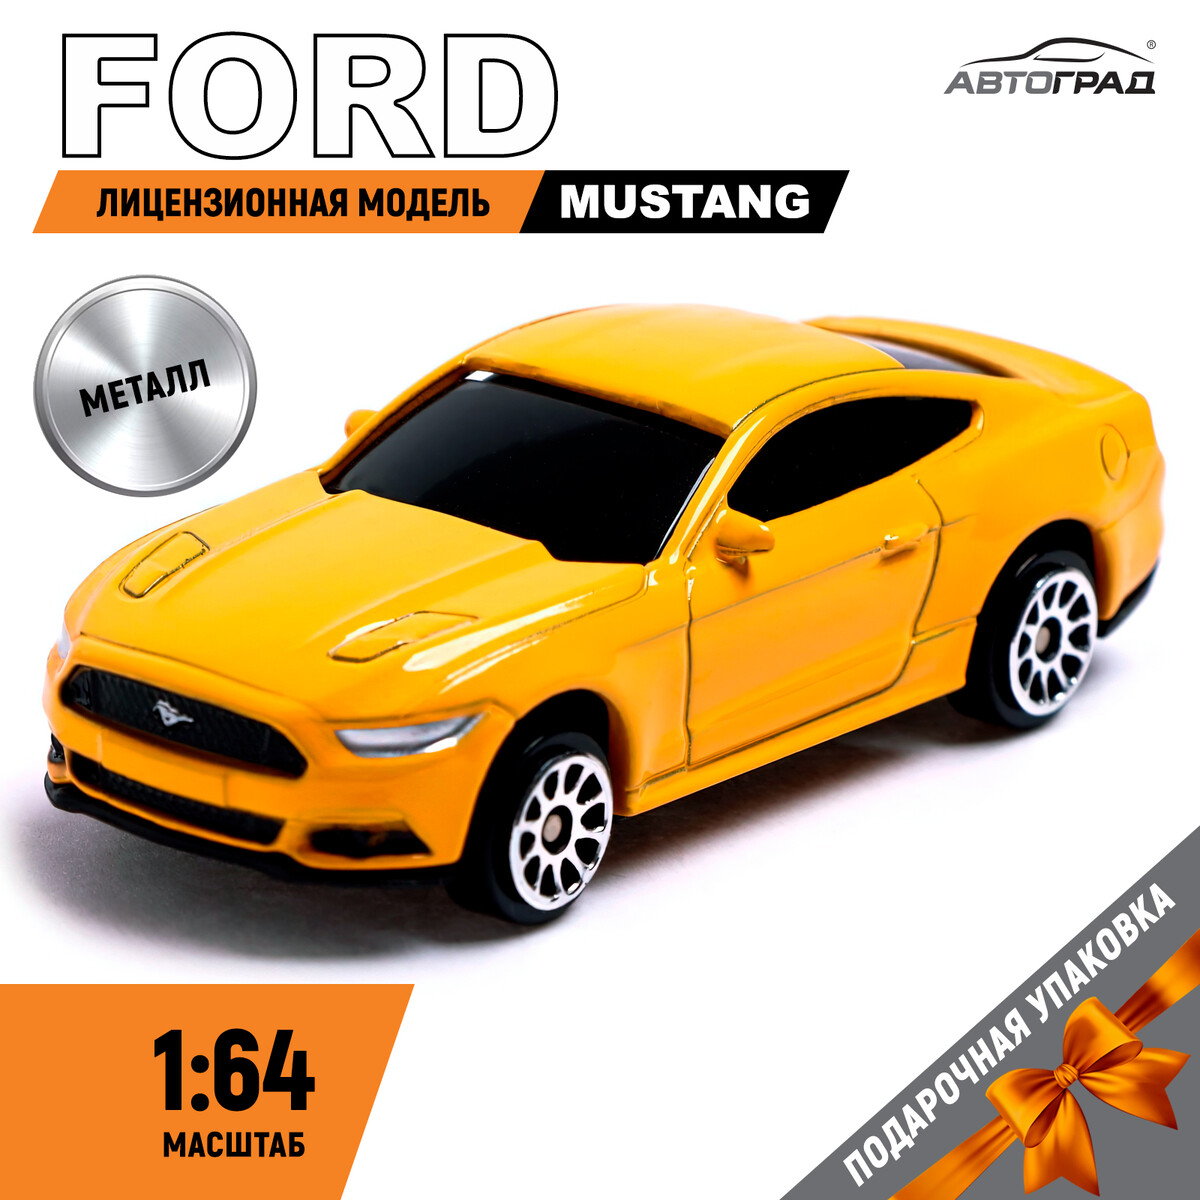 Машина металлическая ford mustang, 1:64, цвет желтый xnrkey 4 button remote car key id49chip 315 433mhz for ford fusion mustang edge explorer mondeo kuka 2013 2017 m3n a2c31243800